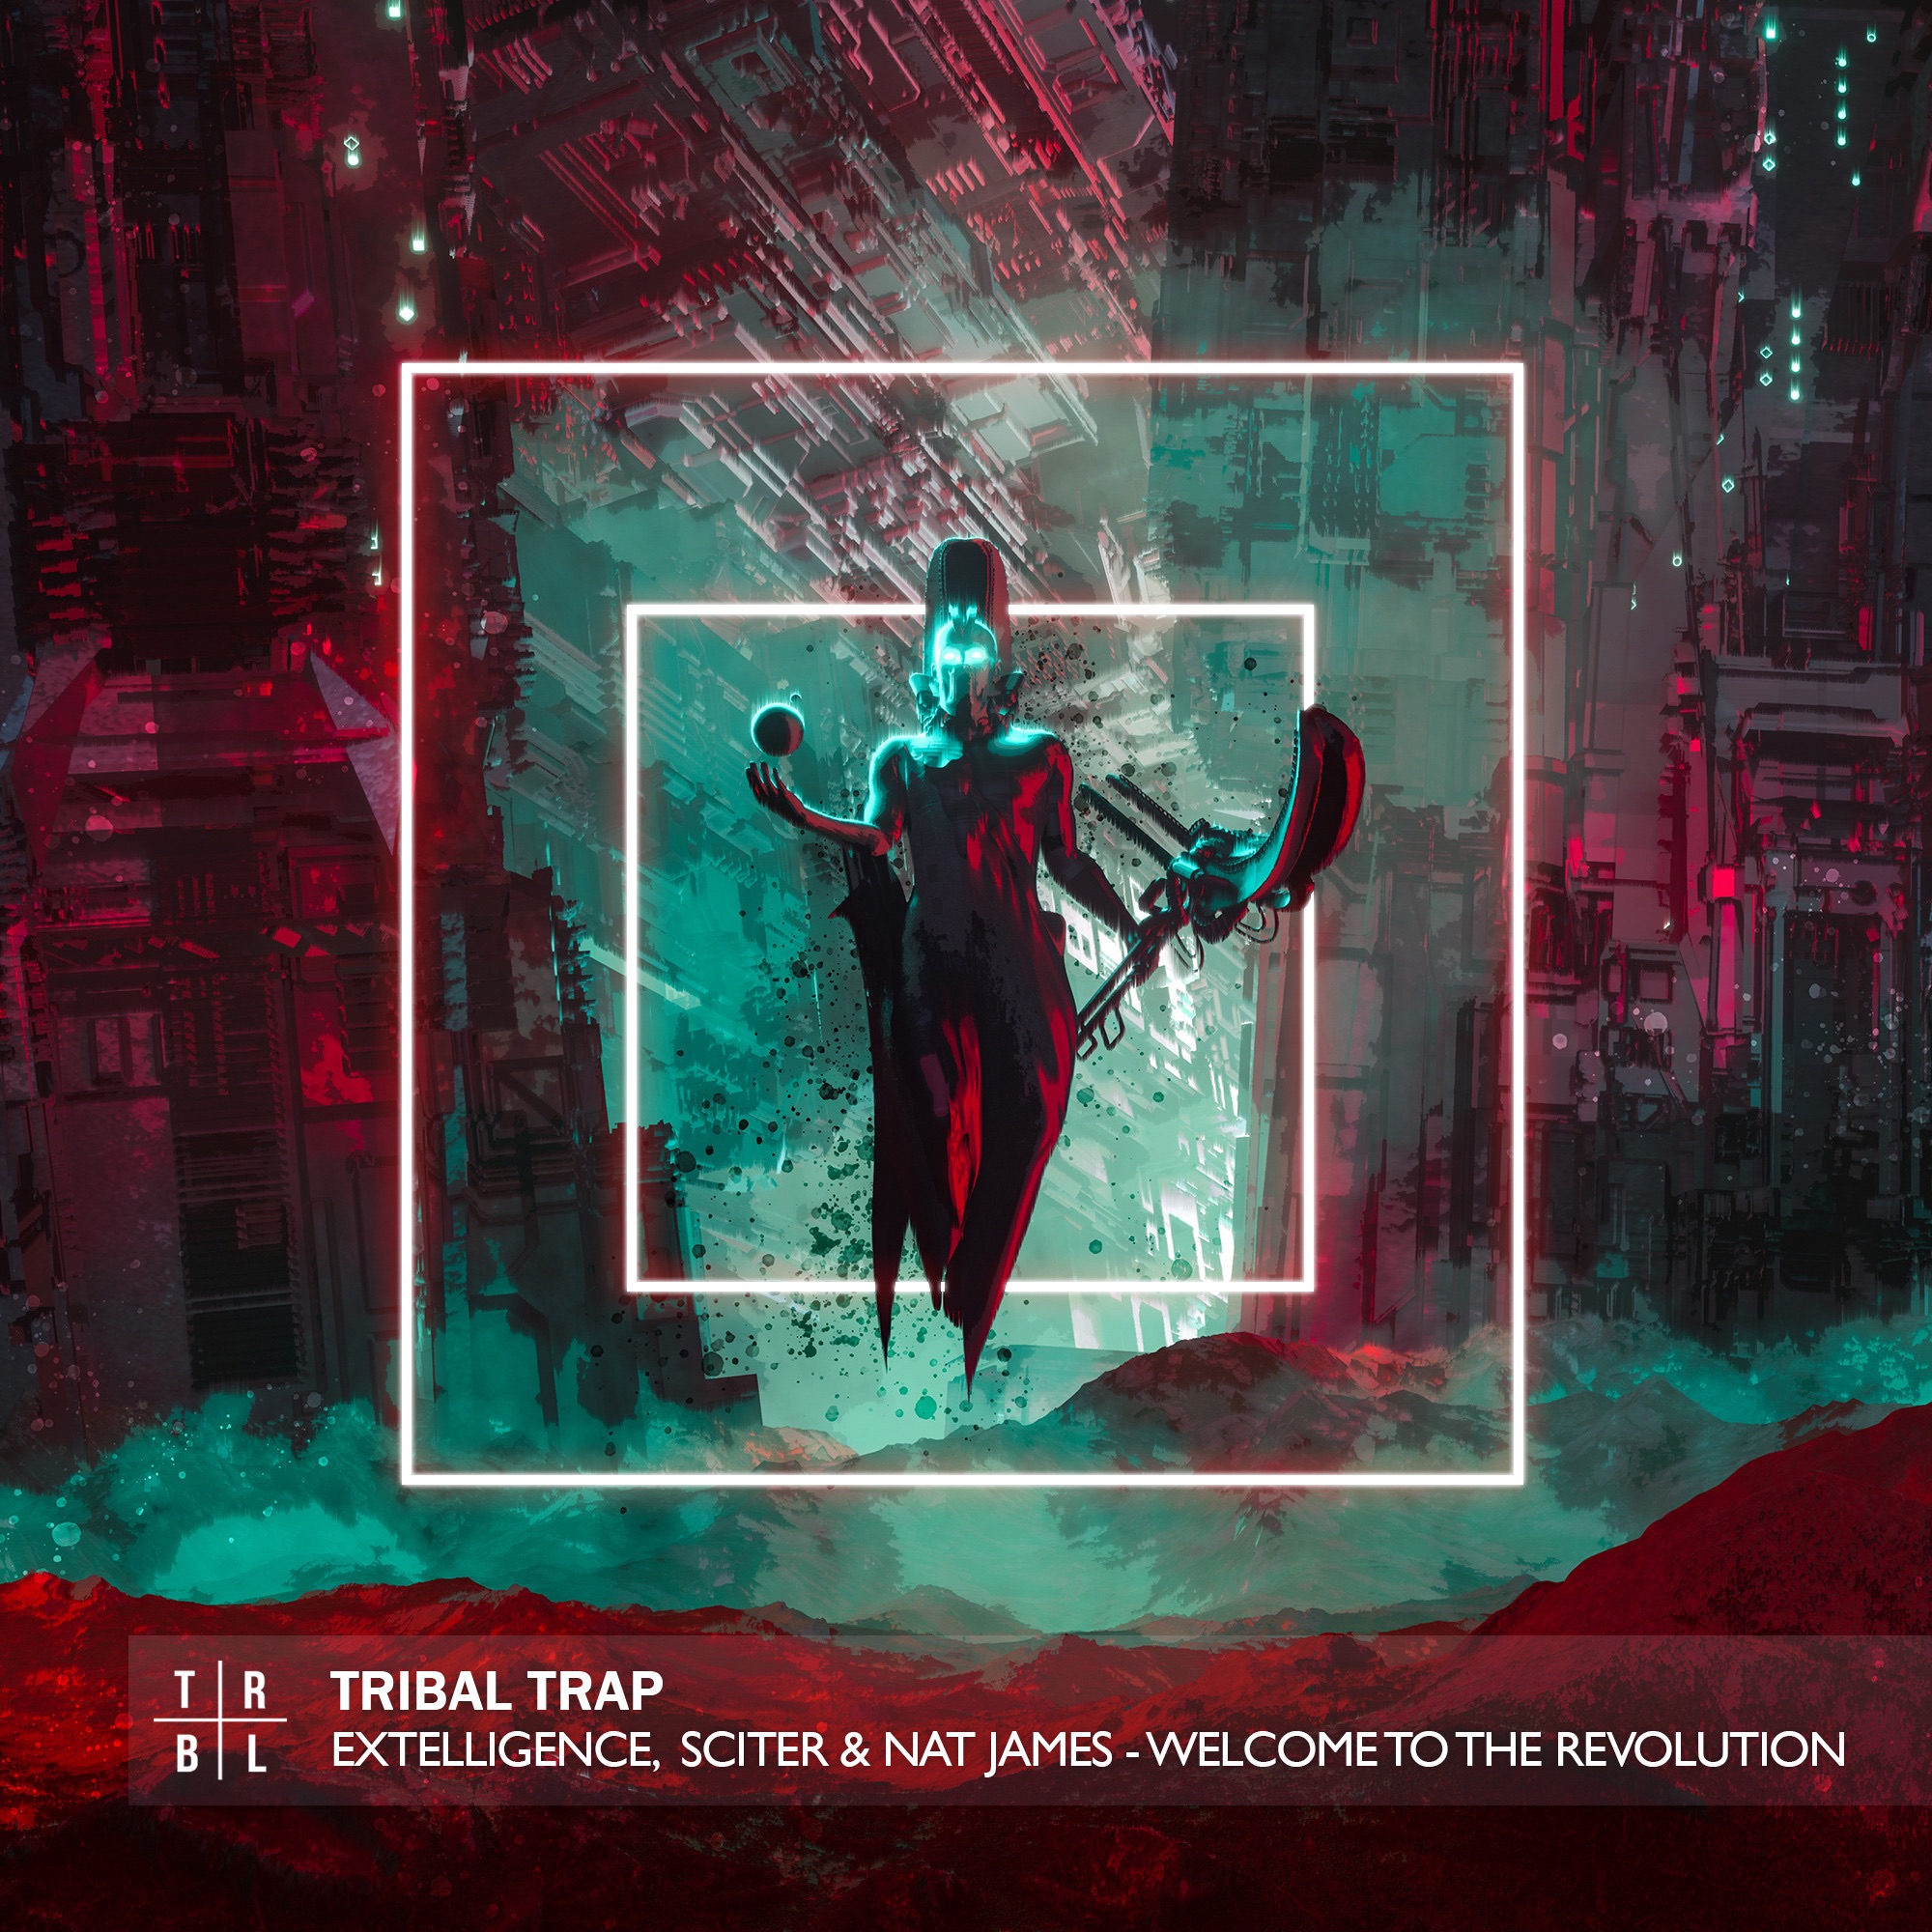 Extelligence, Sciter & Nat James - Welcome to the Revolution - Single